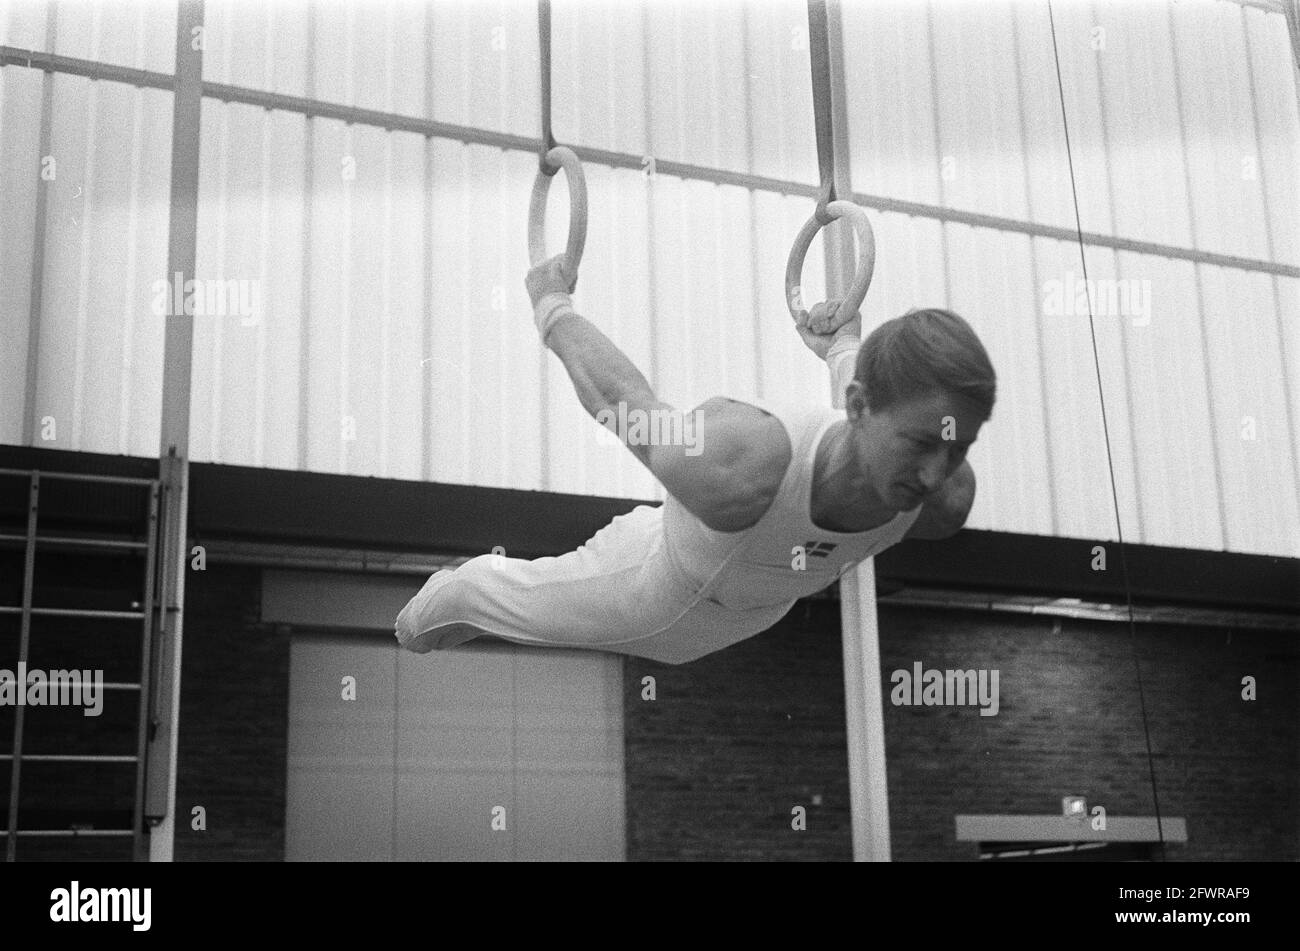 Netherlands against Denmark gymnastics at Zaandam. Hans Peter Nielsen (champion Denmark) on rings in action, November 16, 1969, TURN, The Netherlands, 20th century press agency photo, news to remember, documentary, historic photography 1945-1990, visual stories, human history of the Twentieth Century, capturing moments in time Stock Photo